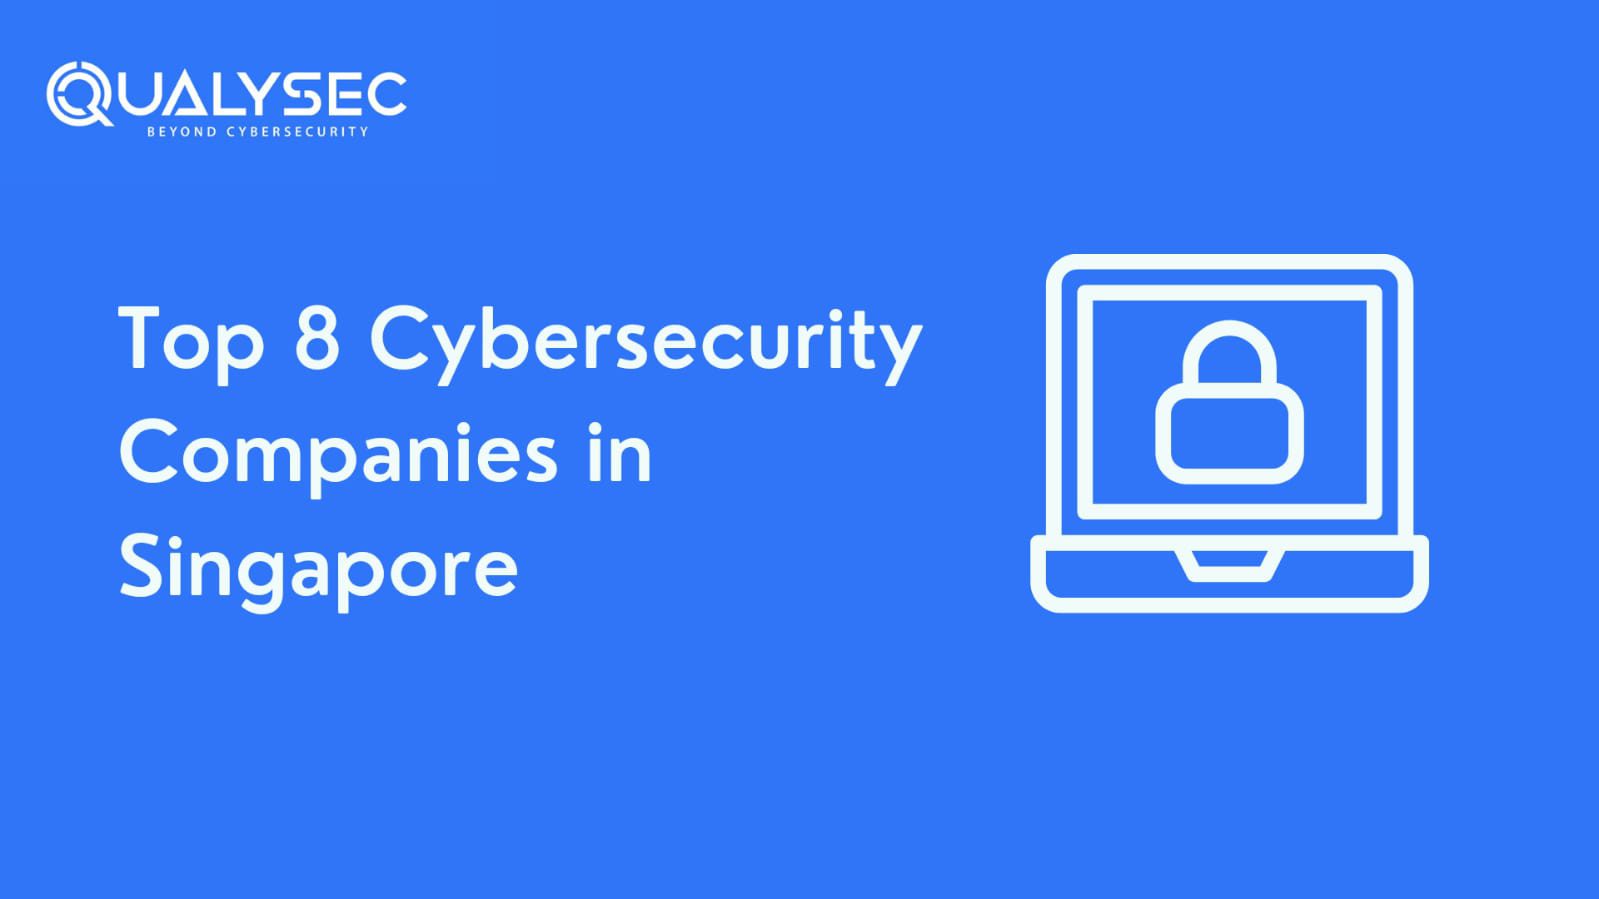 Top 8 Cybersecurity Companies in Singapore